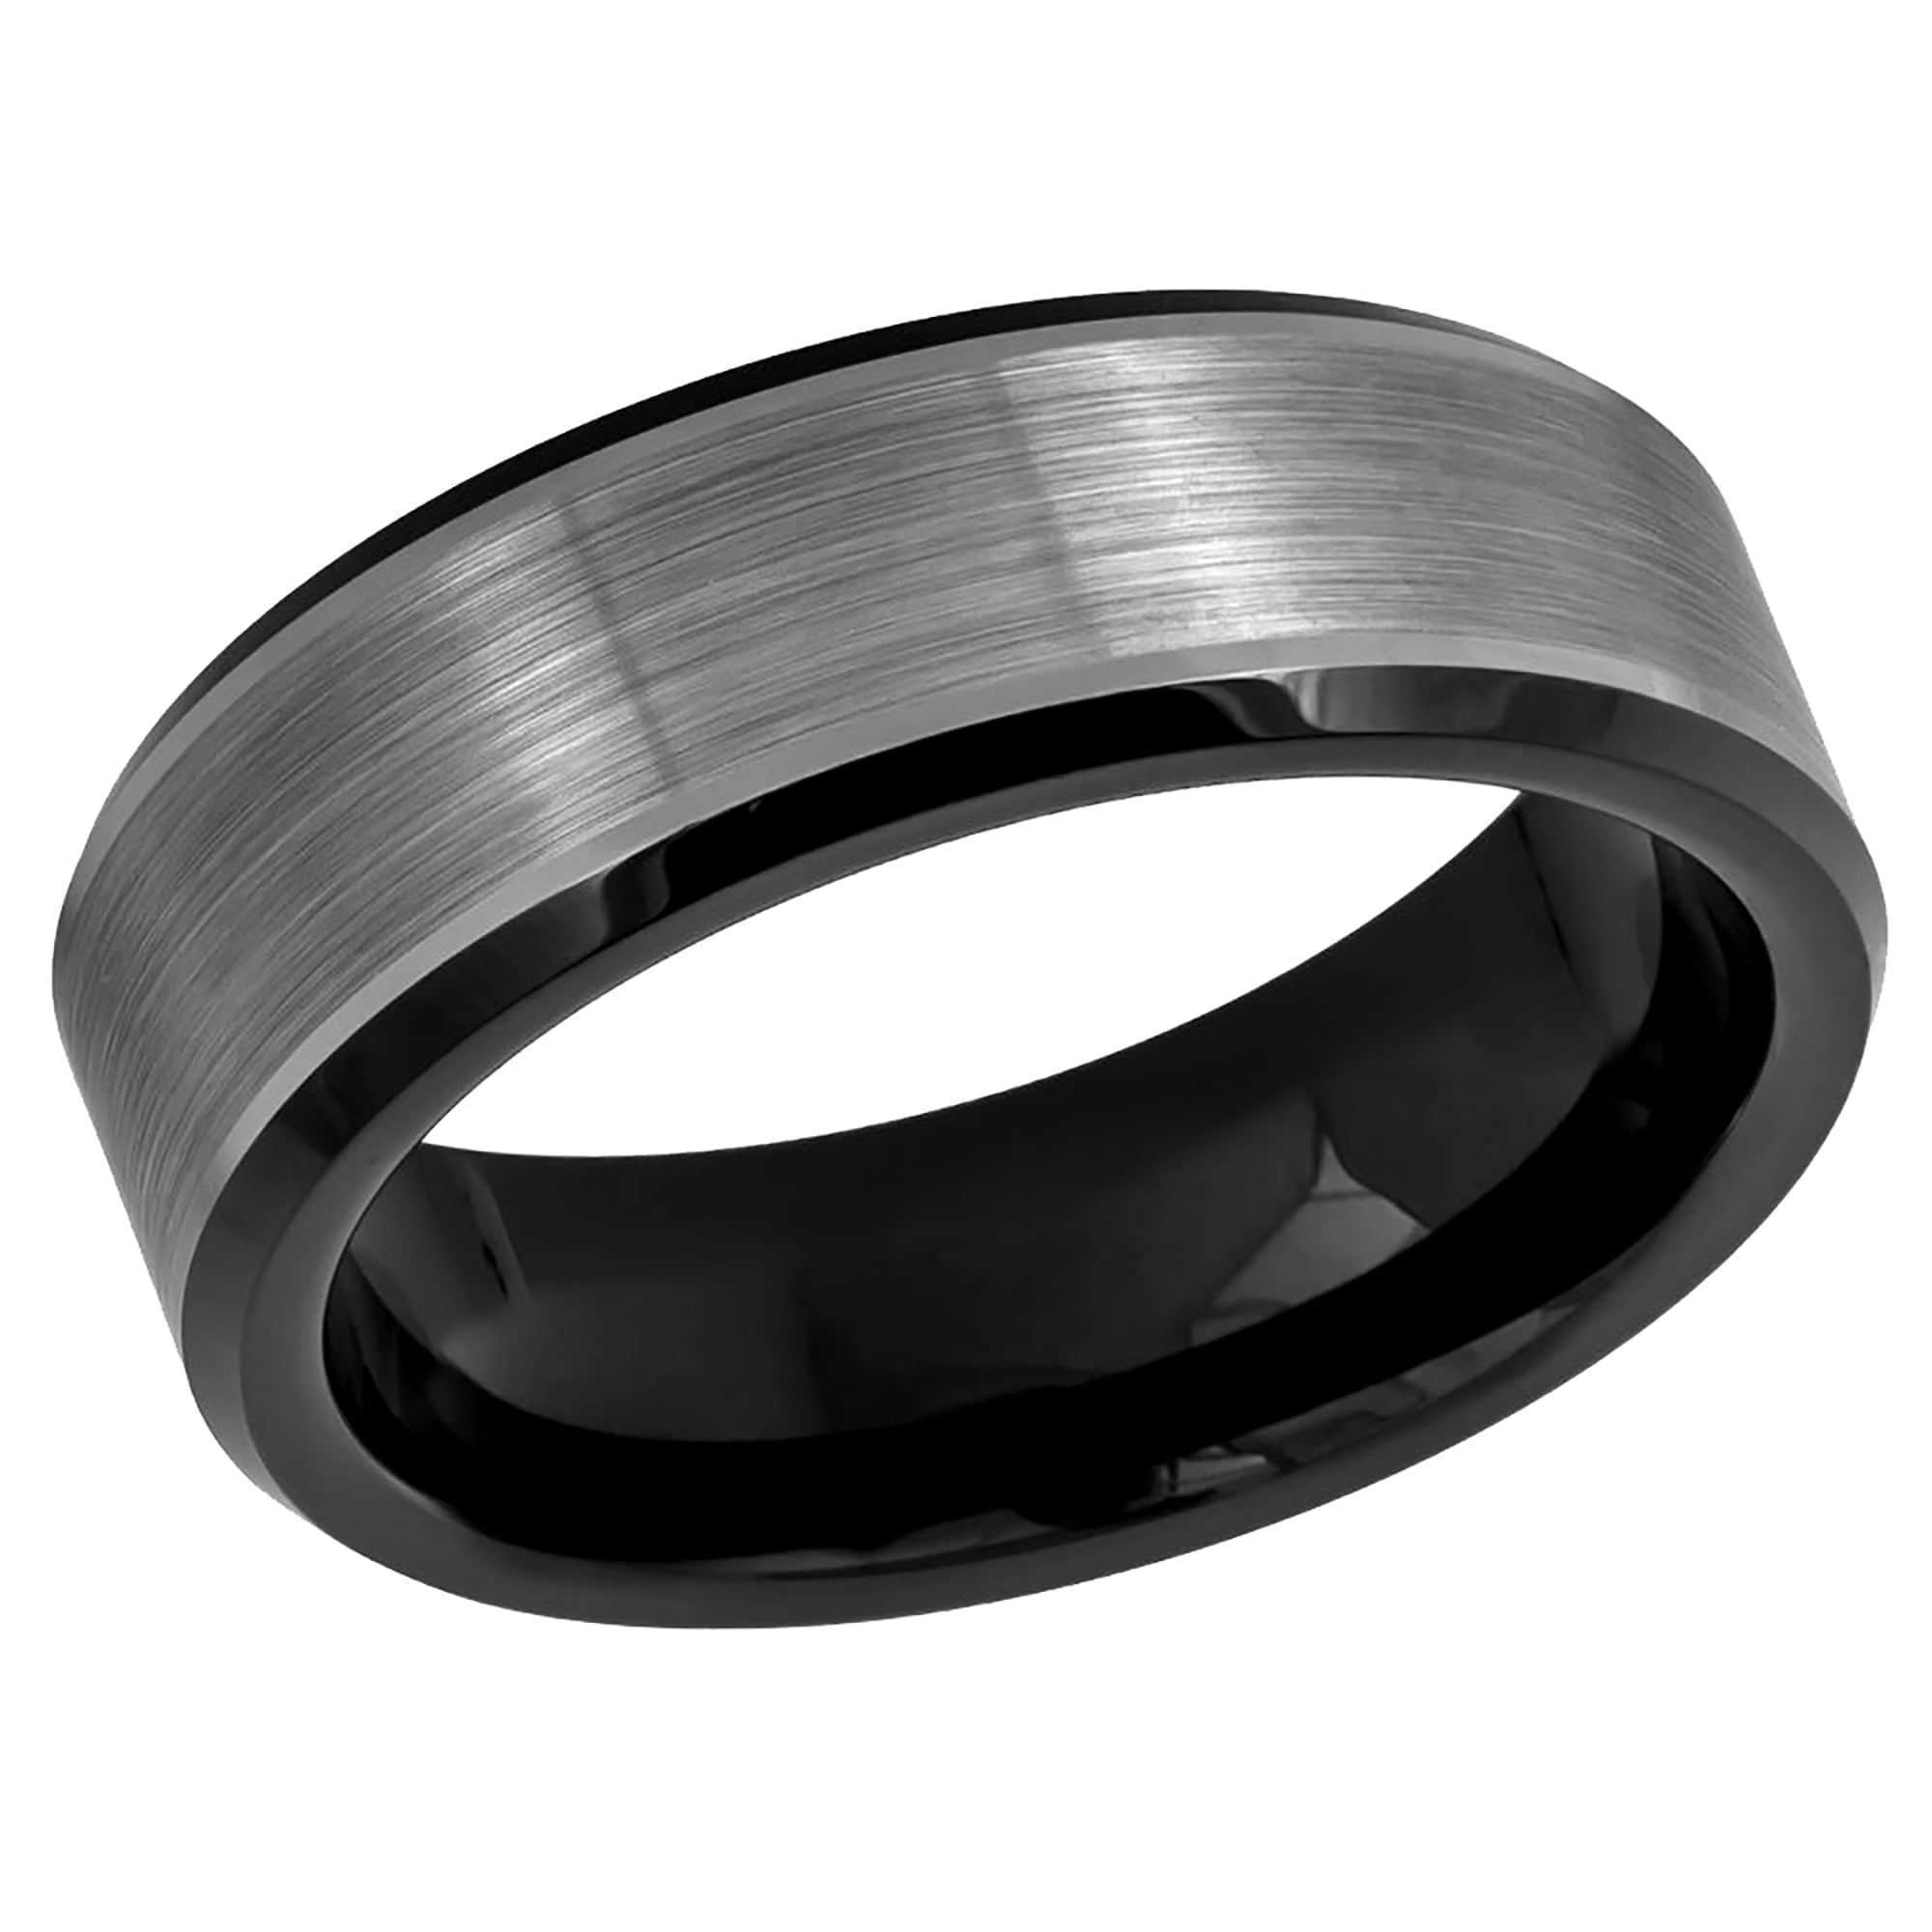 Details about   Men's Tungsten Carbide Black IP Plated Brushed Center Beveled Edge 8mm 